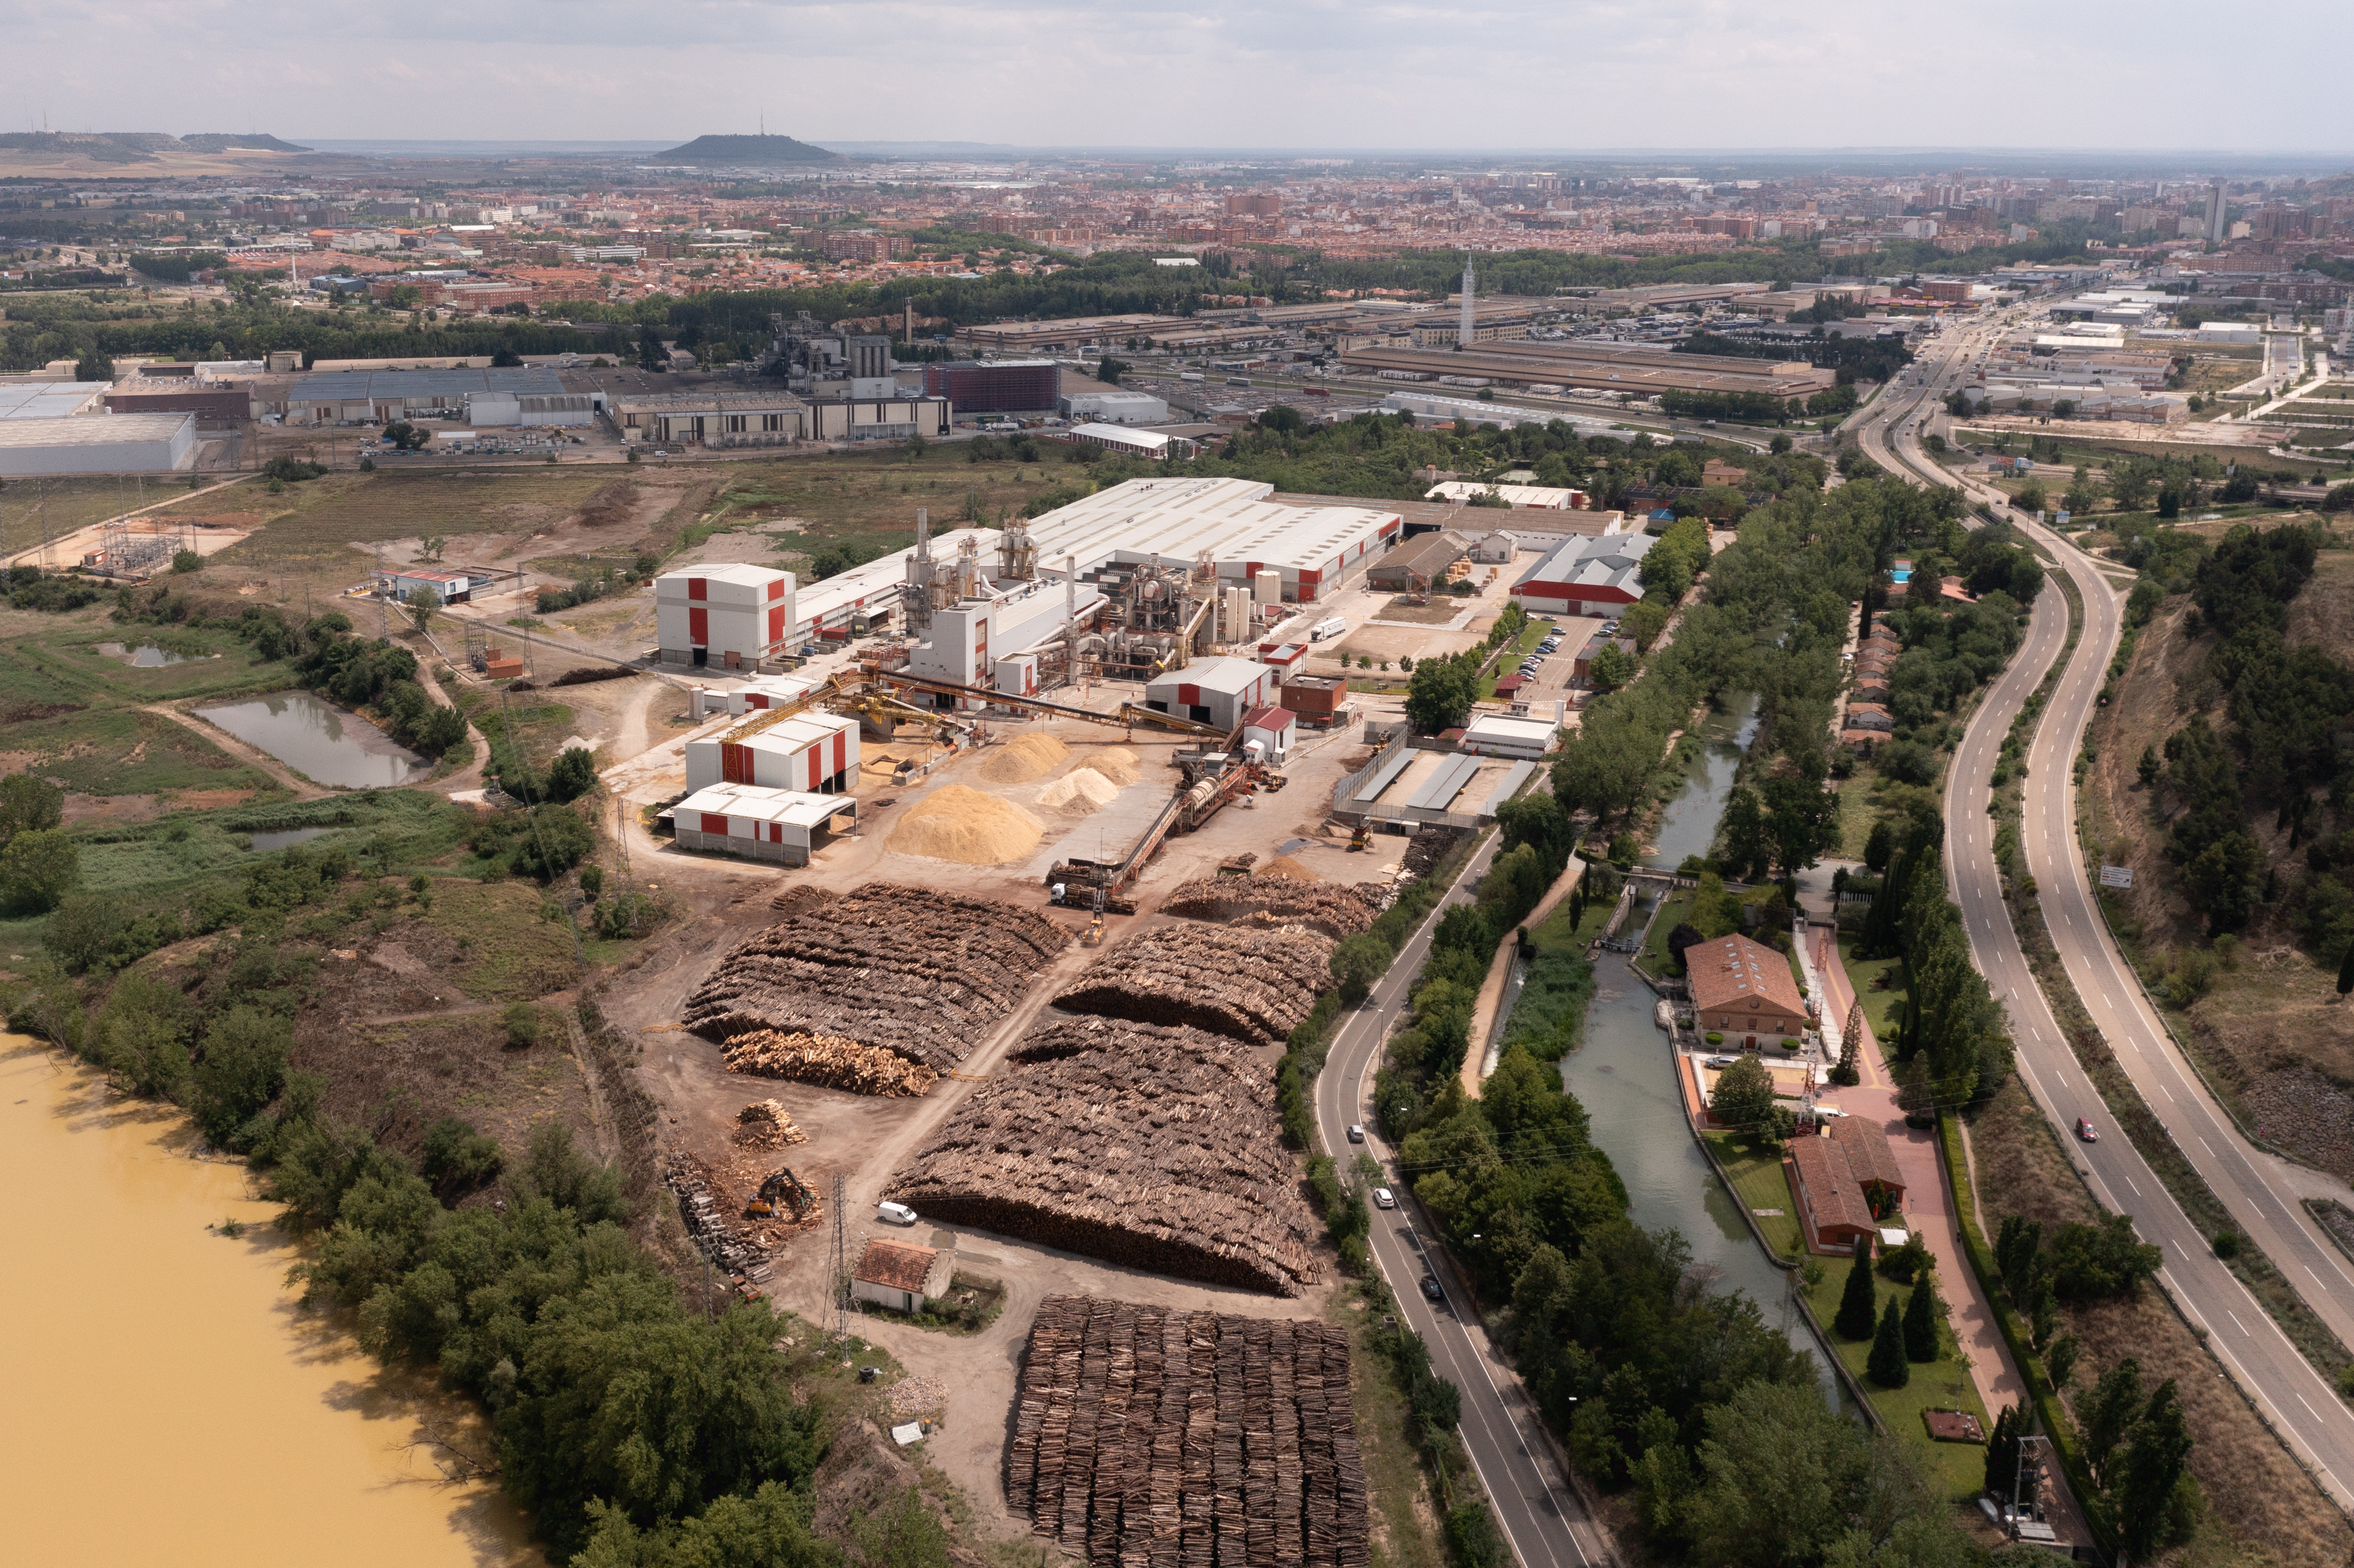 At Valladolid, Sonae Arauco is investigating new wood solutions for construction